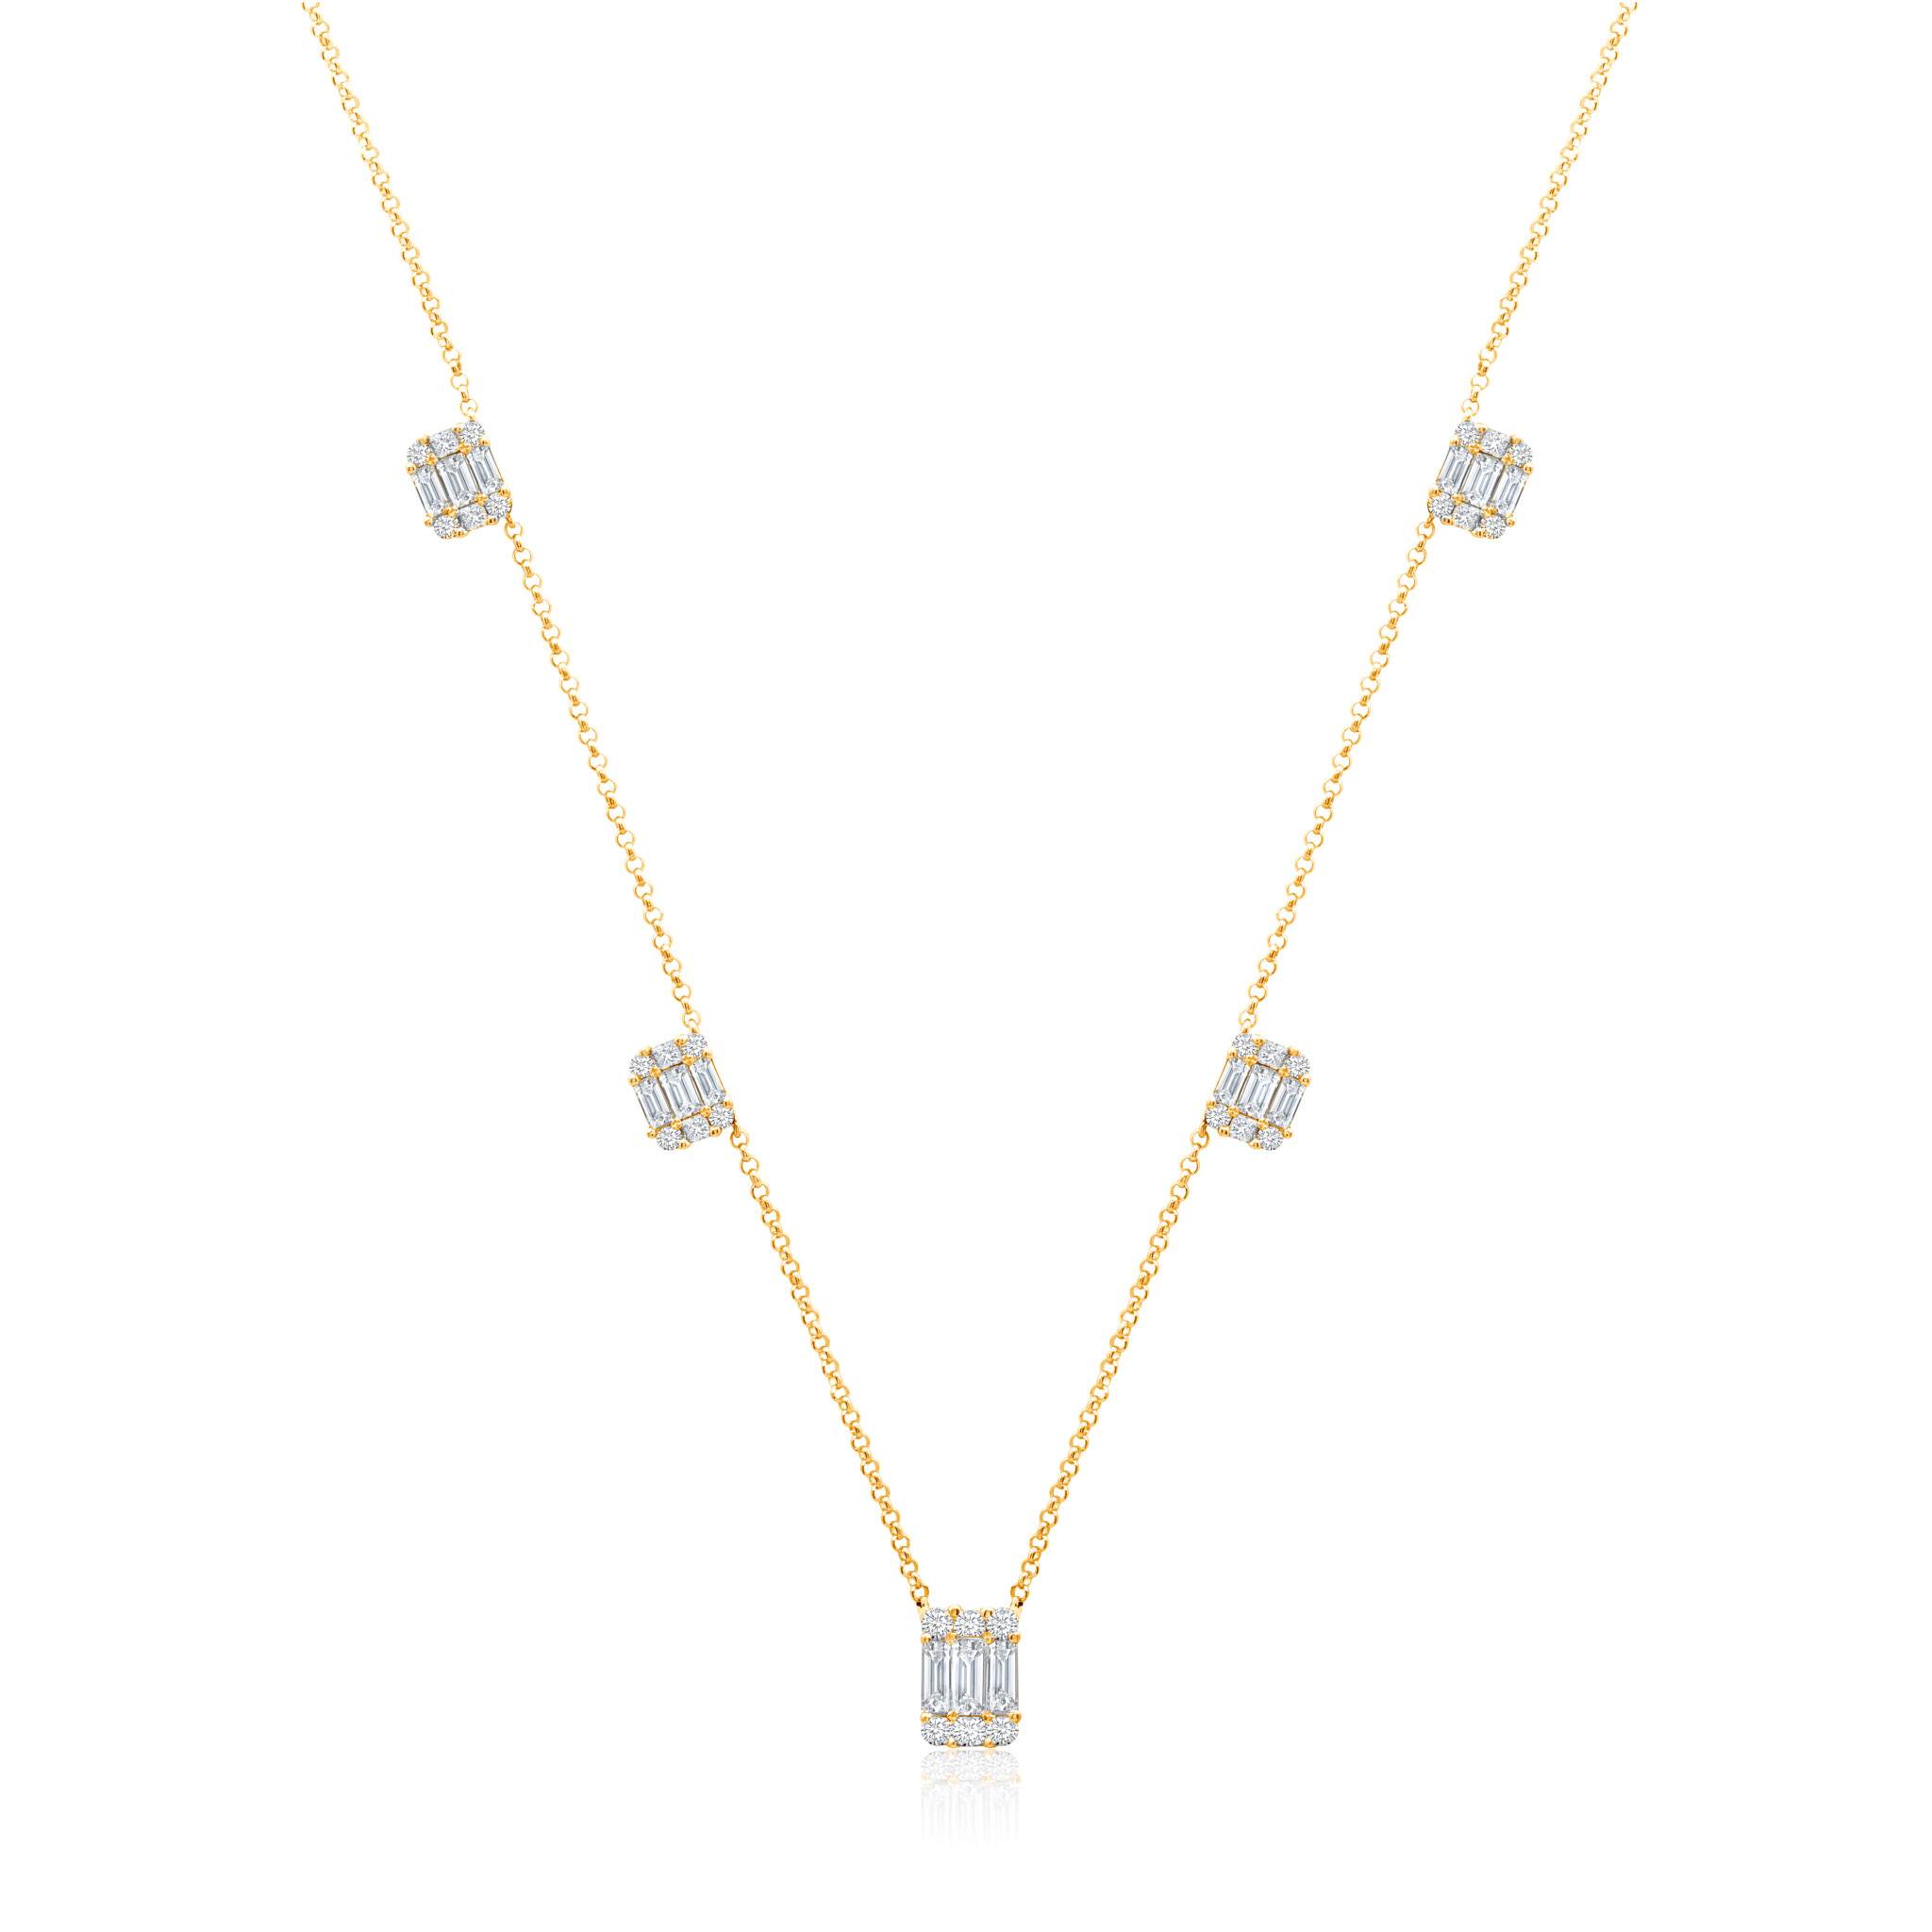 Graziela Gems - Necklace - Diamond Ascension 5 Station Necklace - Yellow Gold